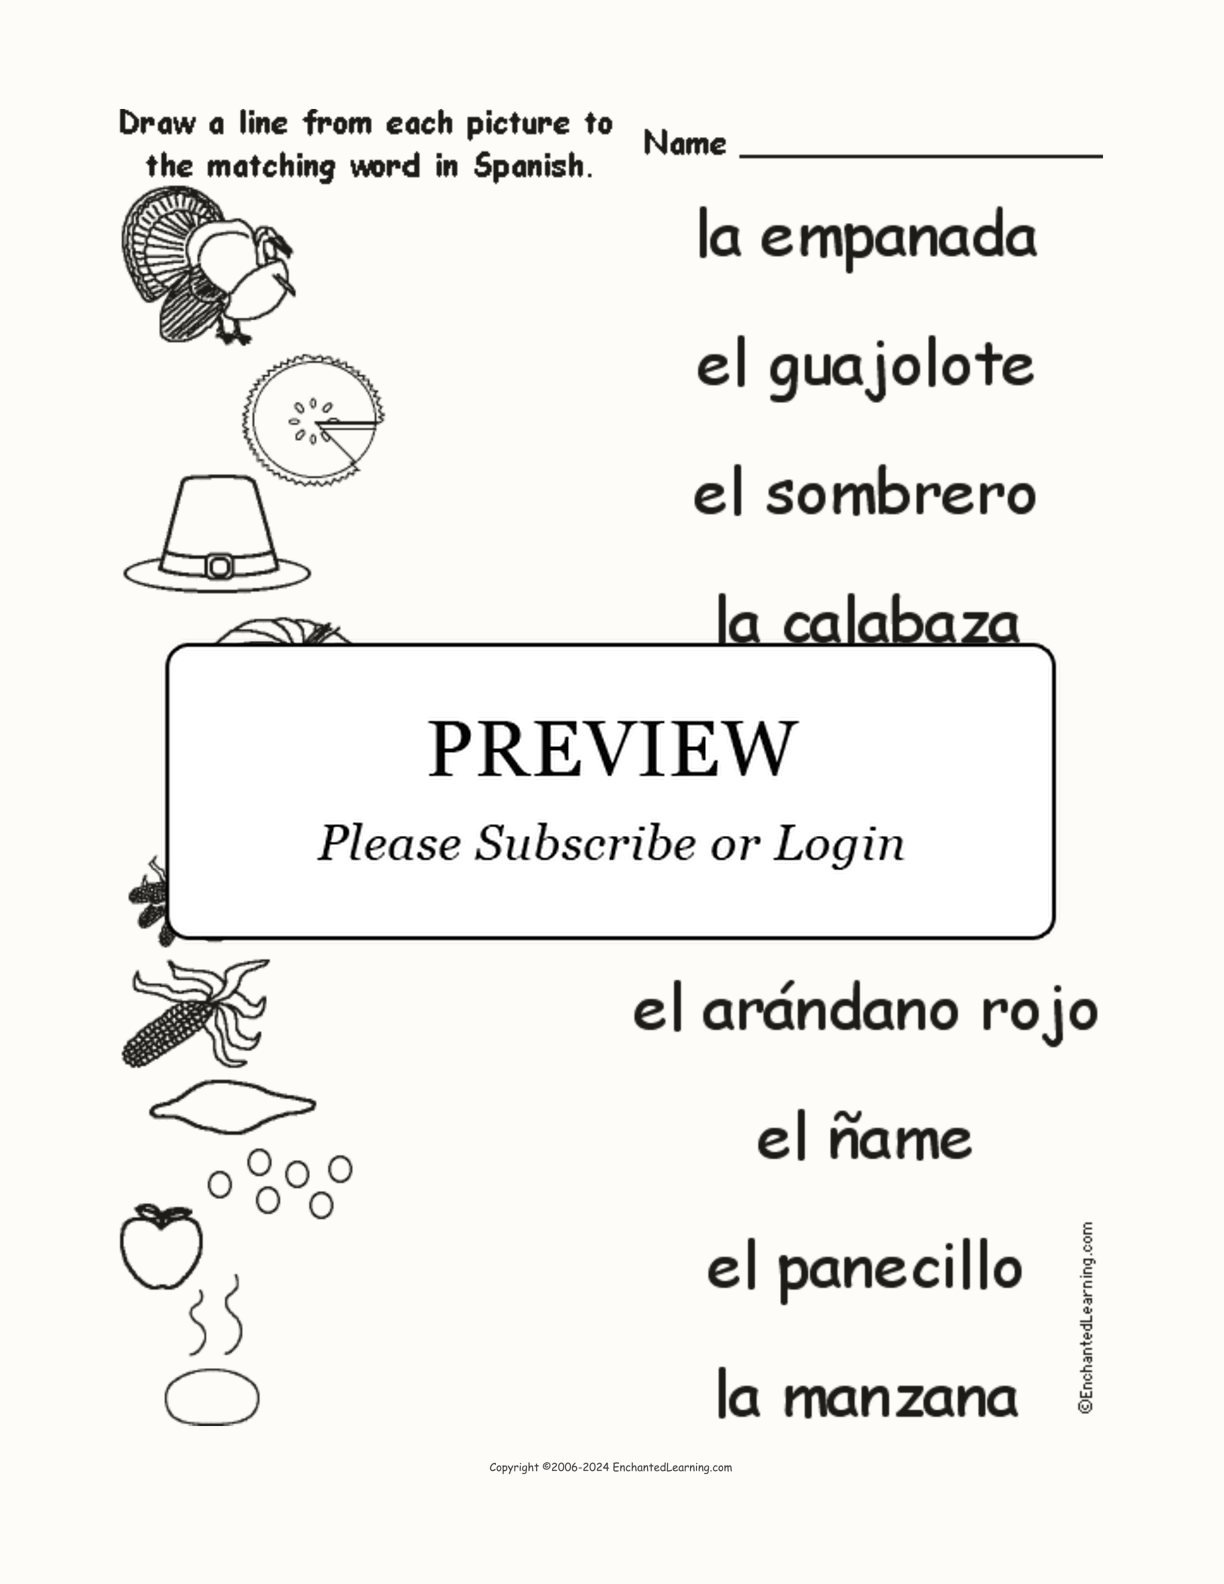 Thanksgiving: Match Spanish Words to Pictures interactive worksheet page 1